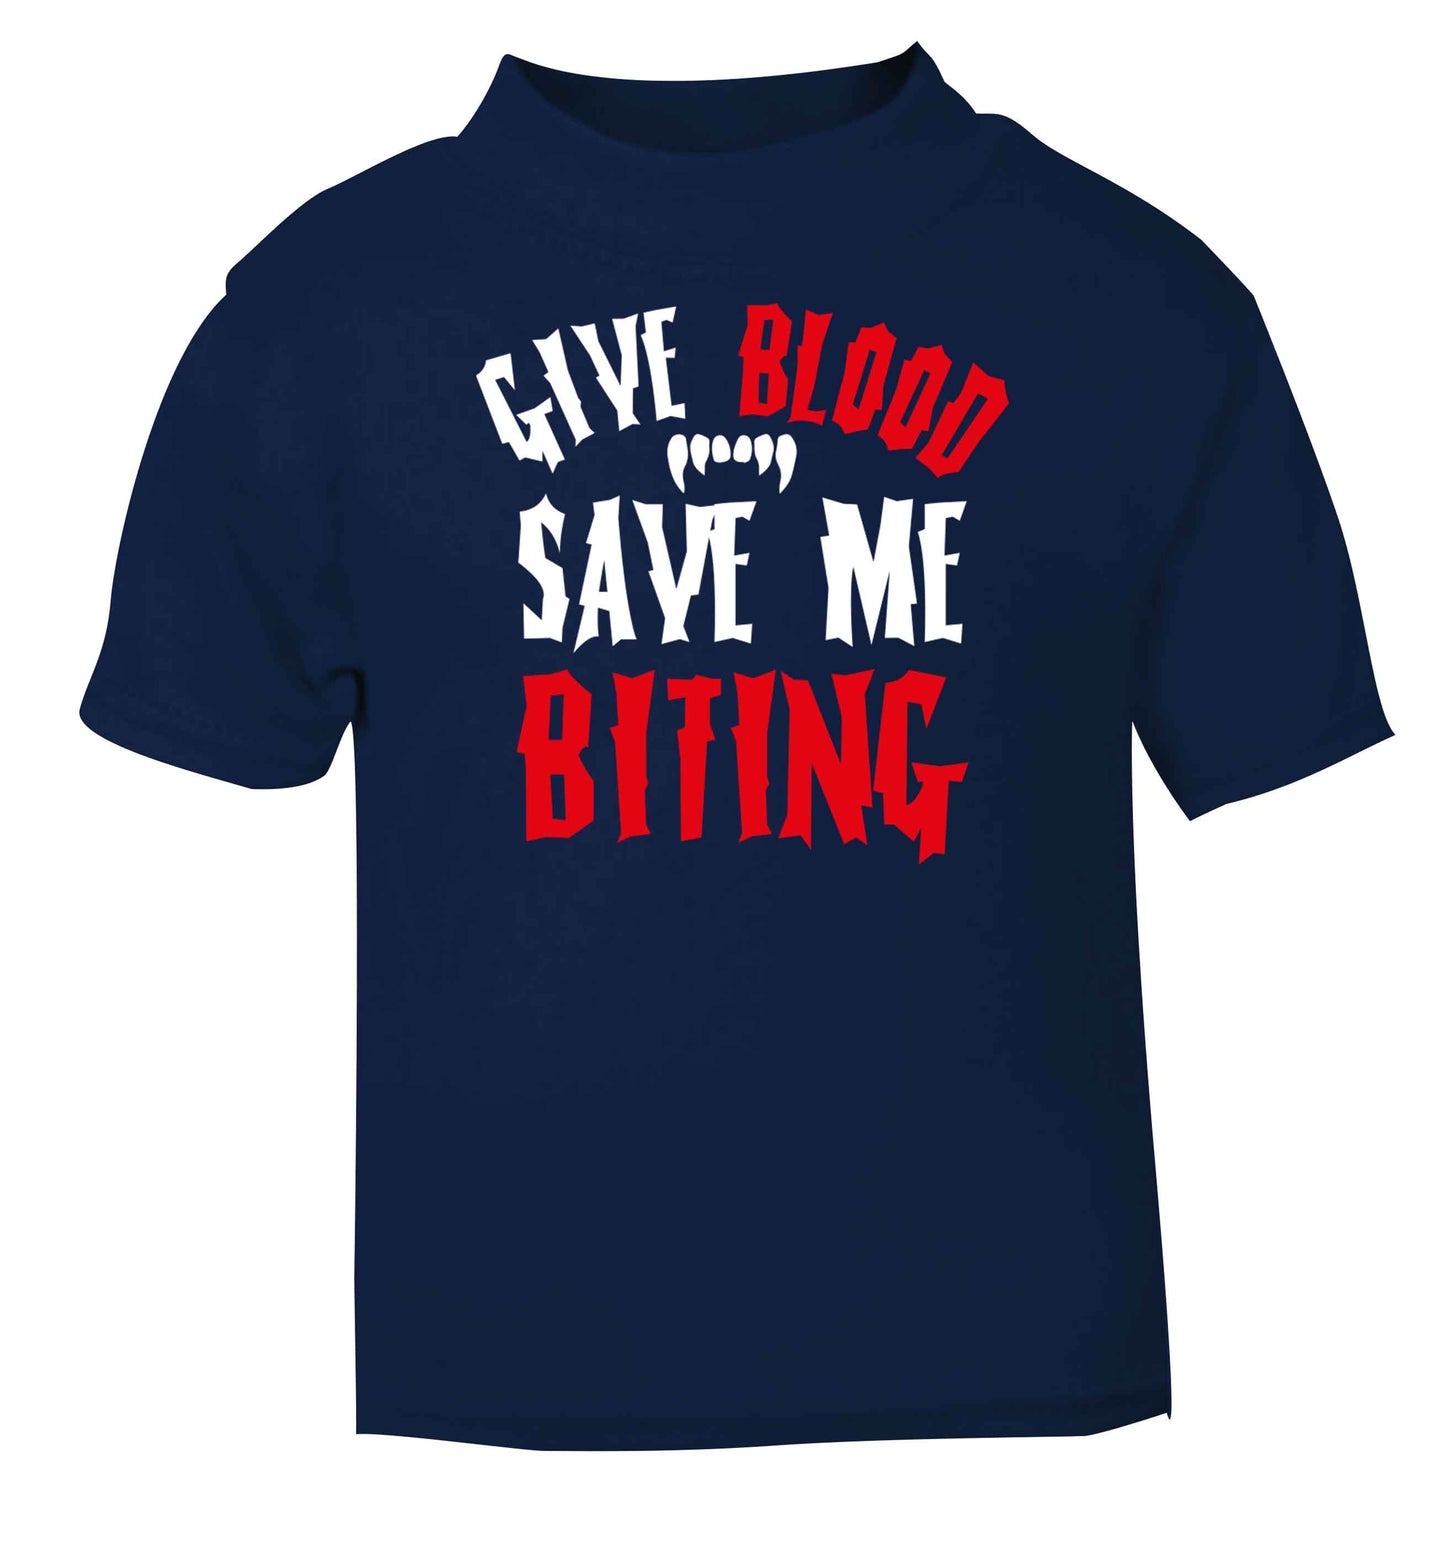 Give blood save me biting navy baby toddler Tshirt 2 Years